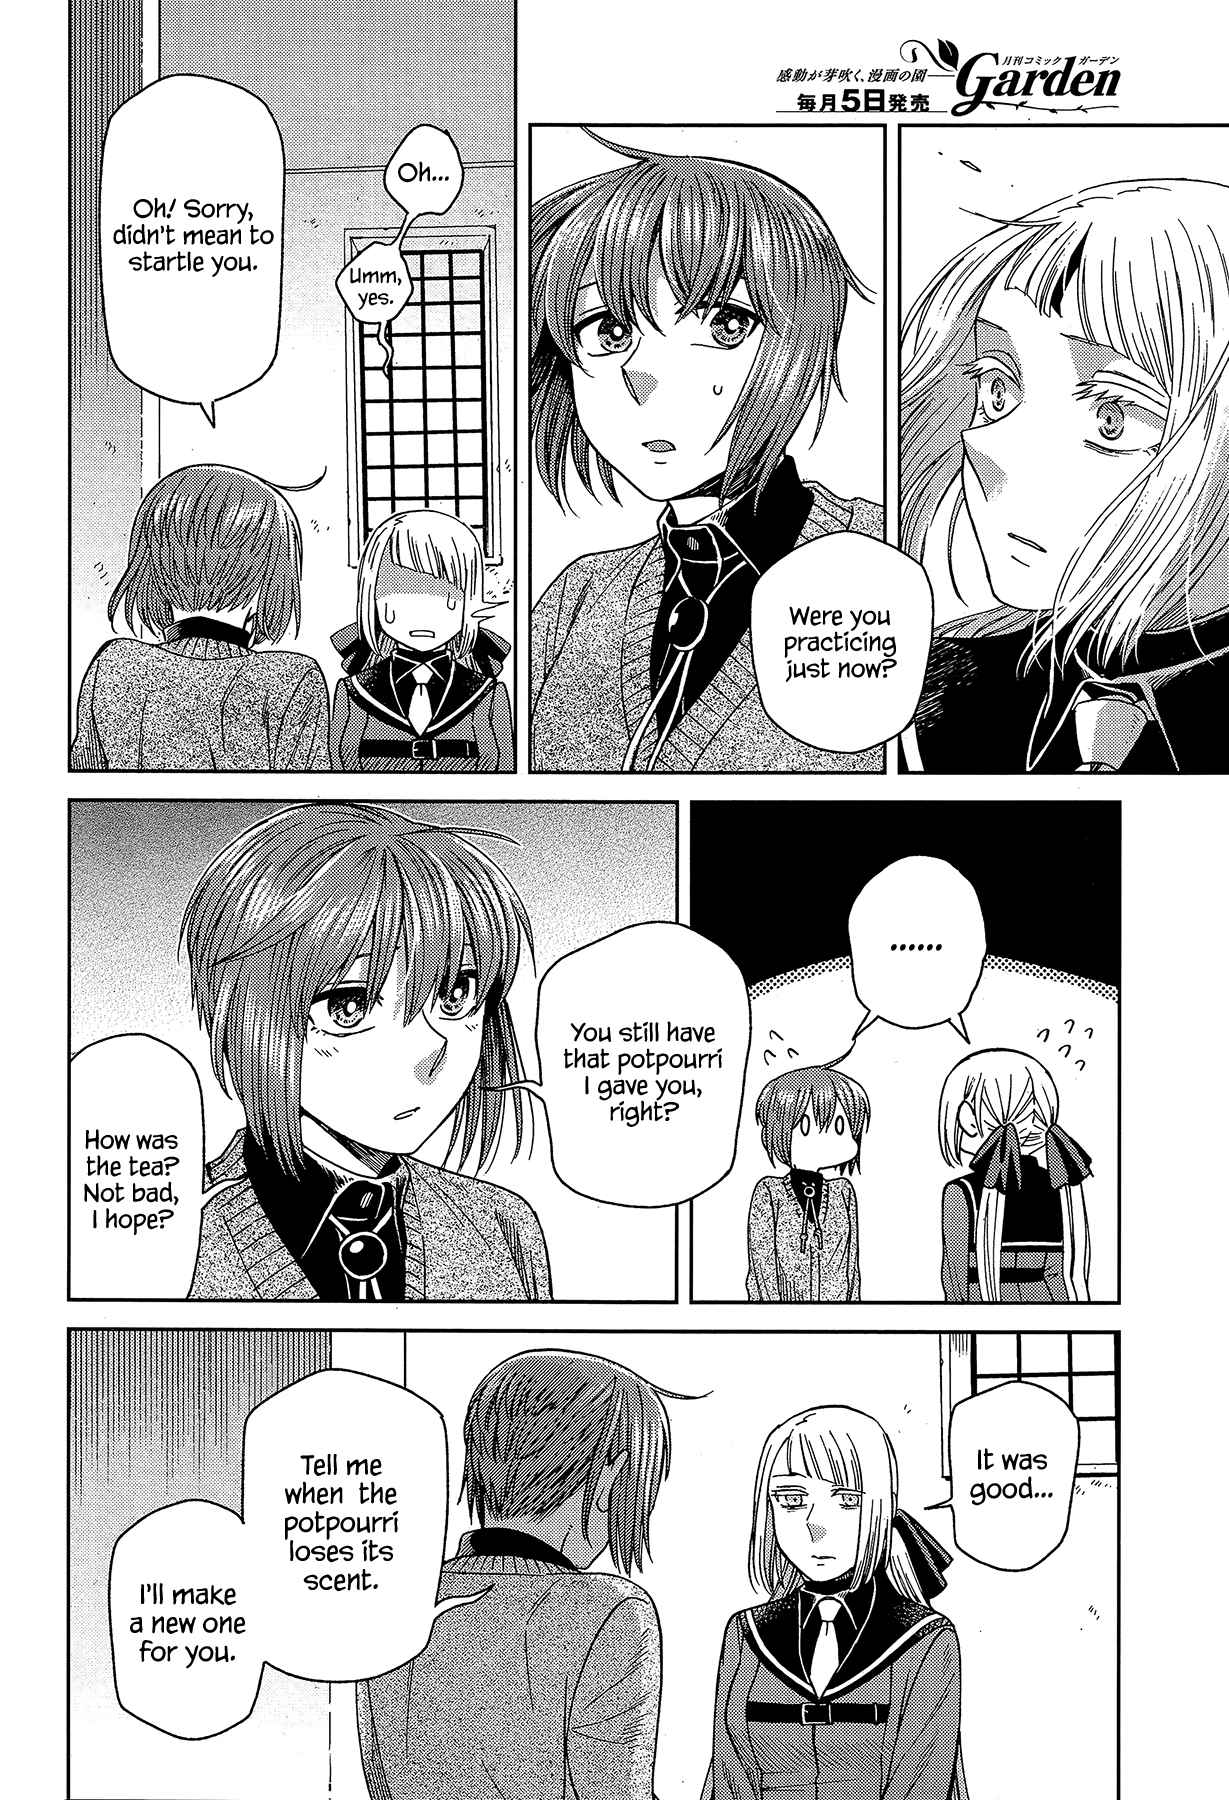 The Ancient Magus' Bride Ch. 62 Conscience does make cowards of us all I